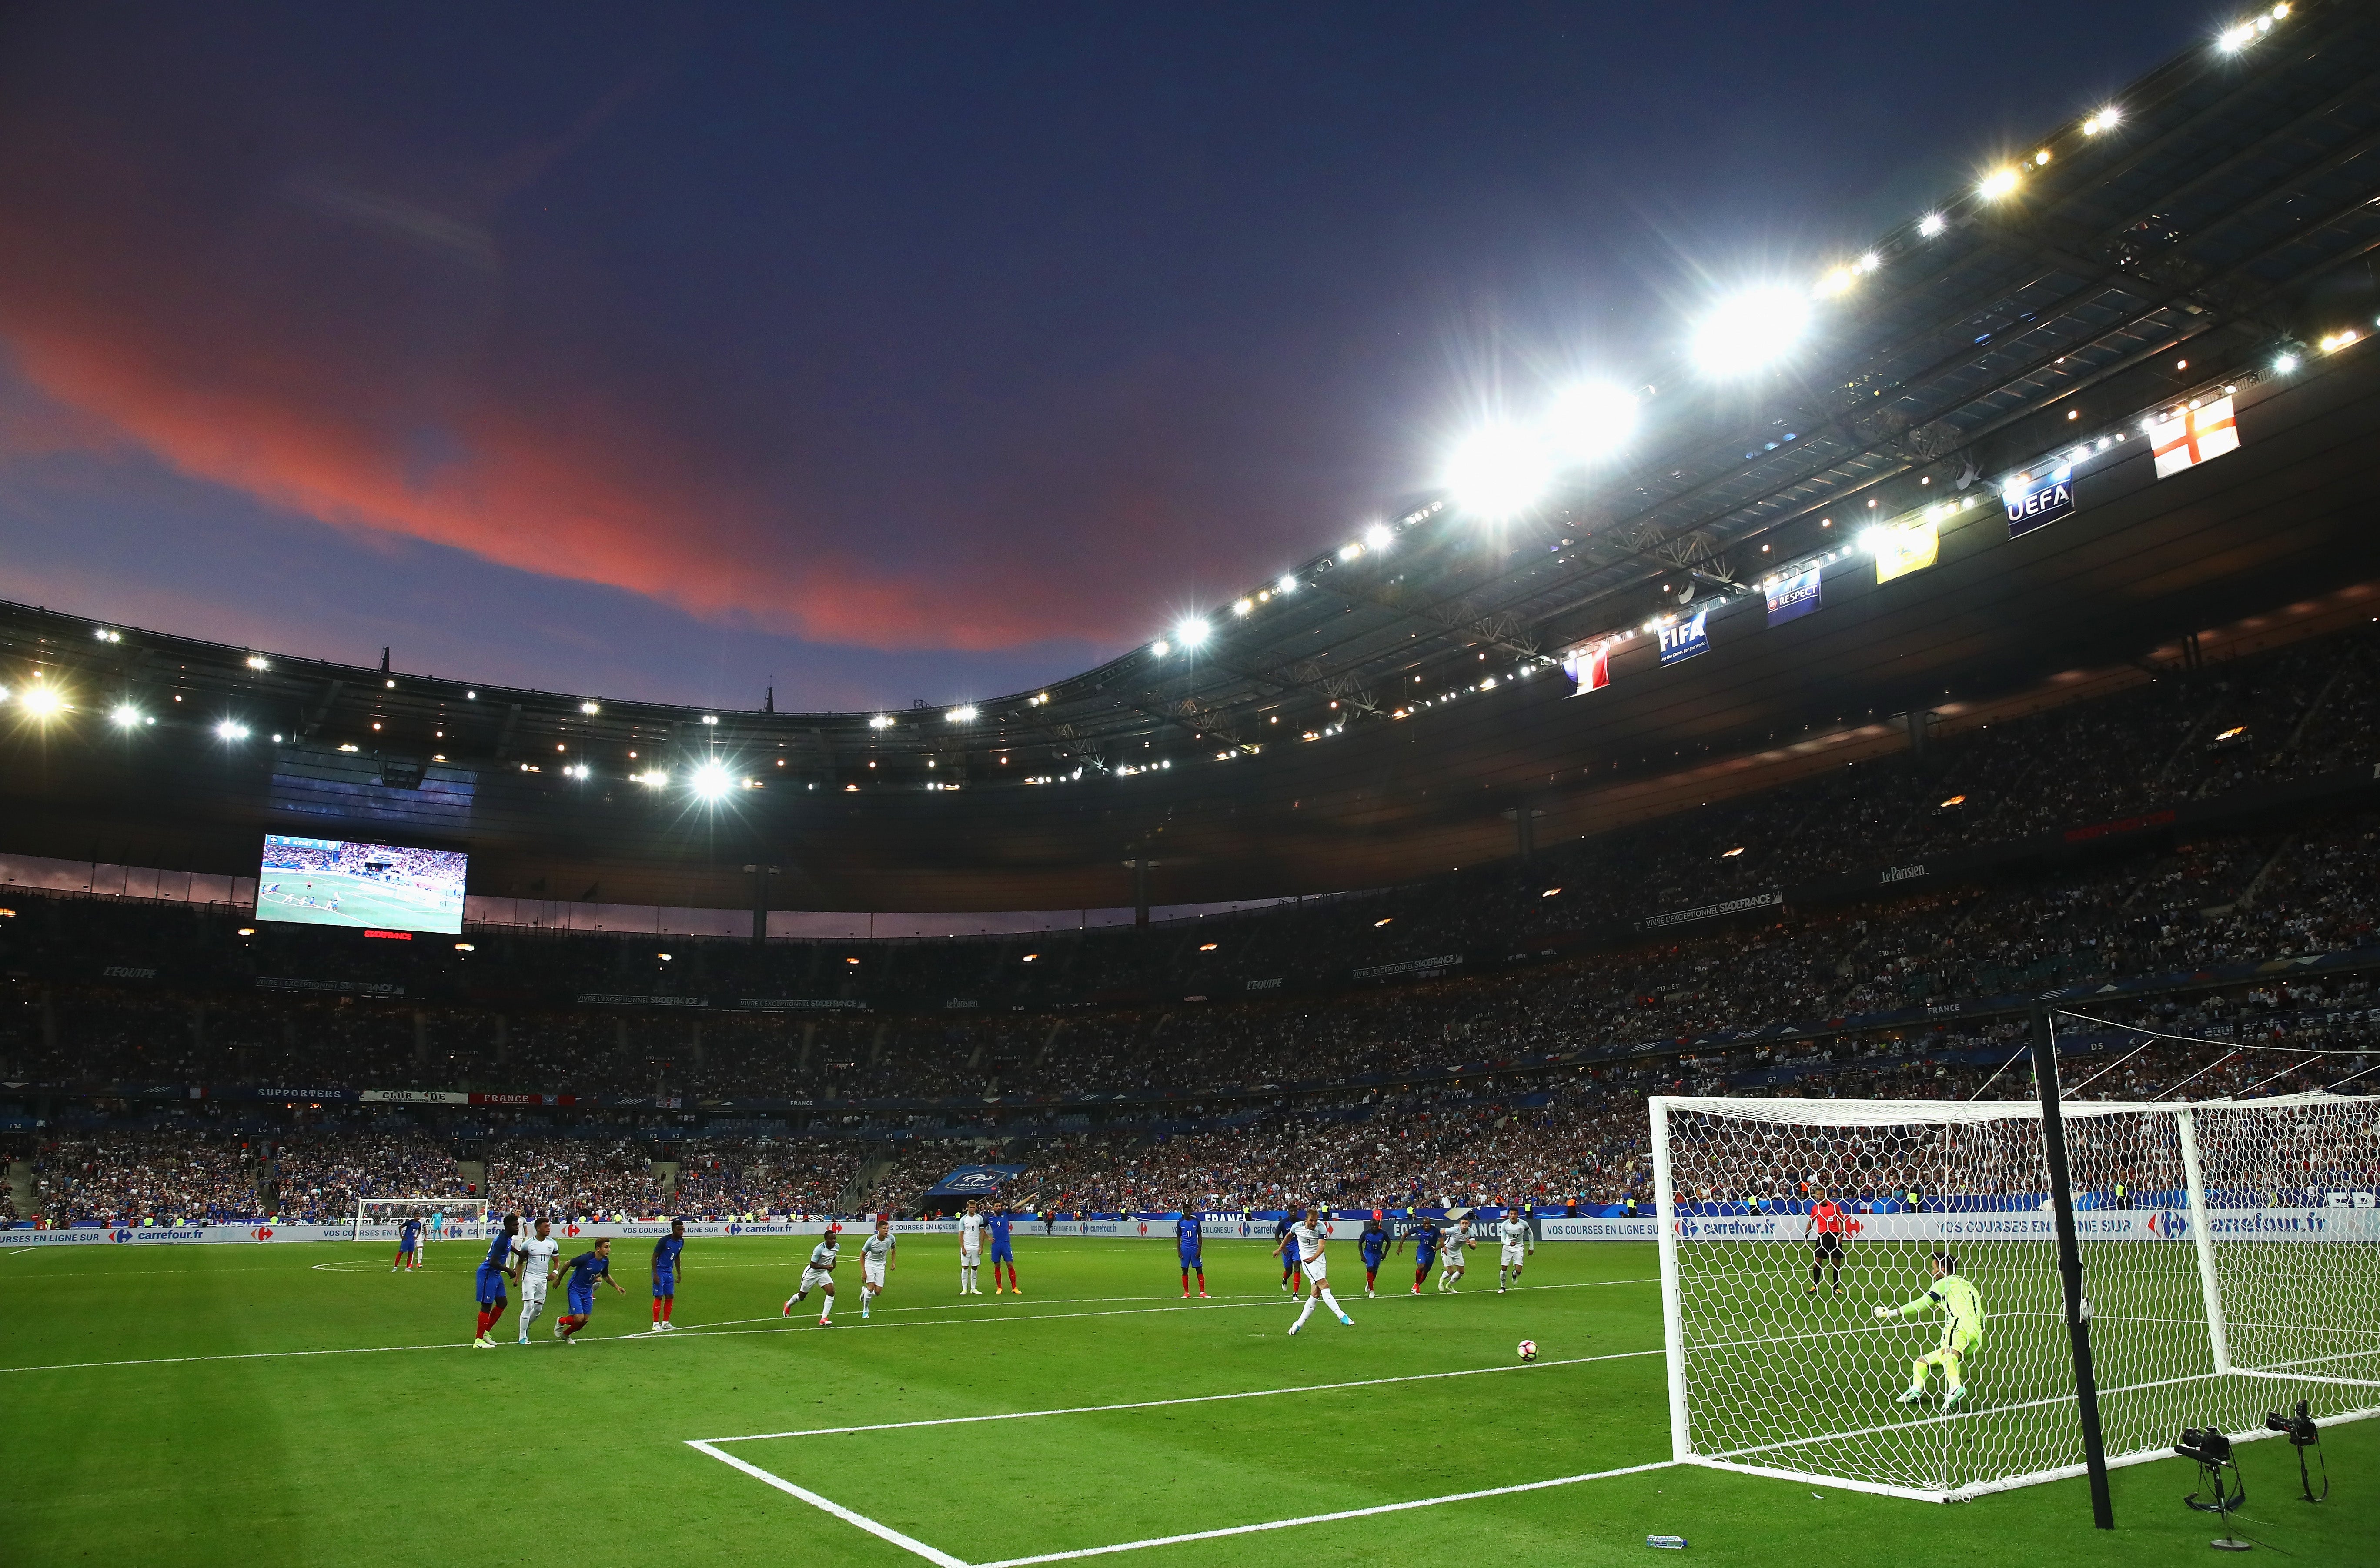 The Stade de France will host the Champions League final on May 28